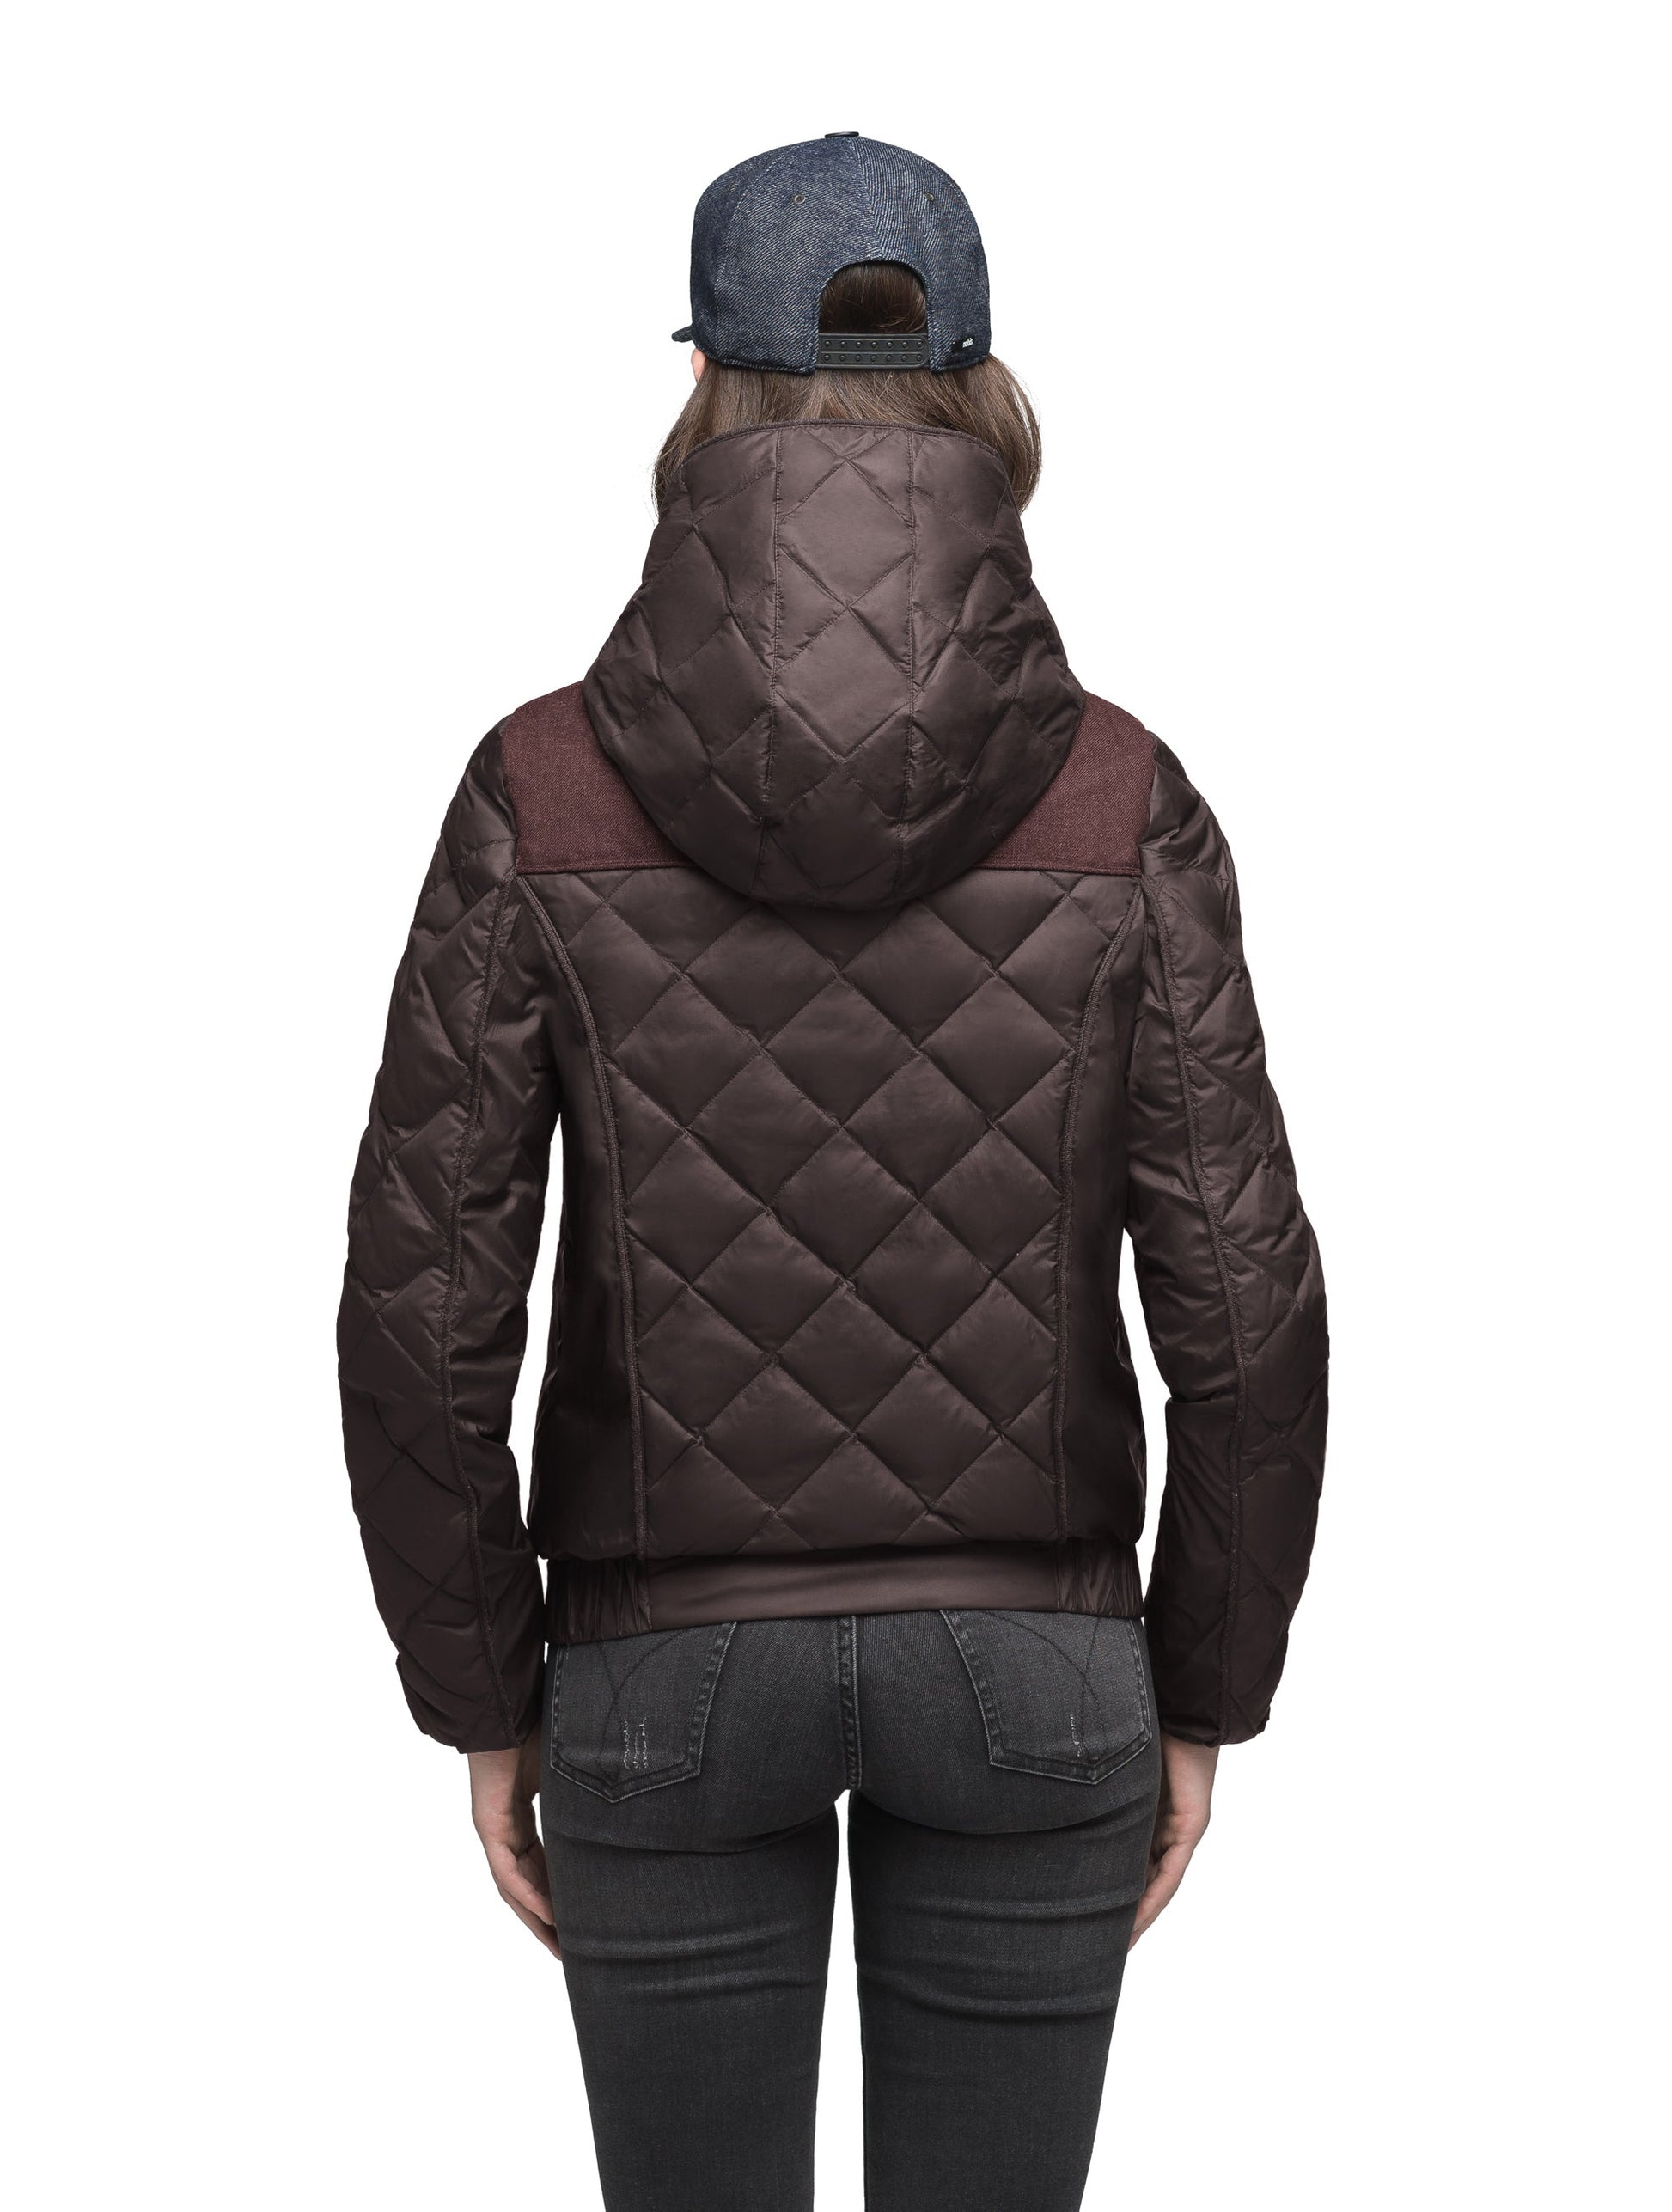 Lightweight women's jacket with hood and quilted pattern featuring a contrasting upper fabric in Dark Brown